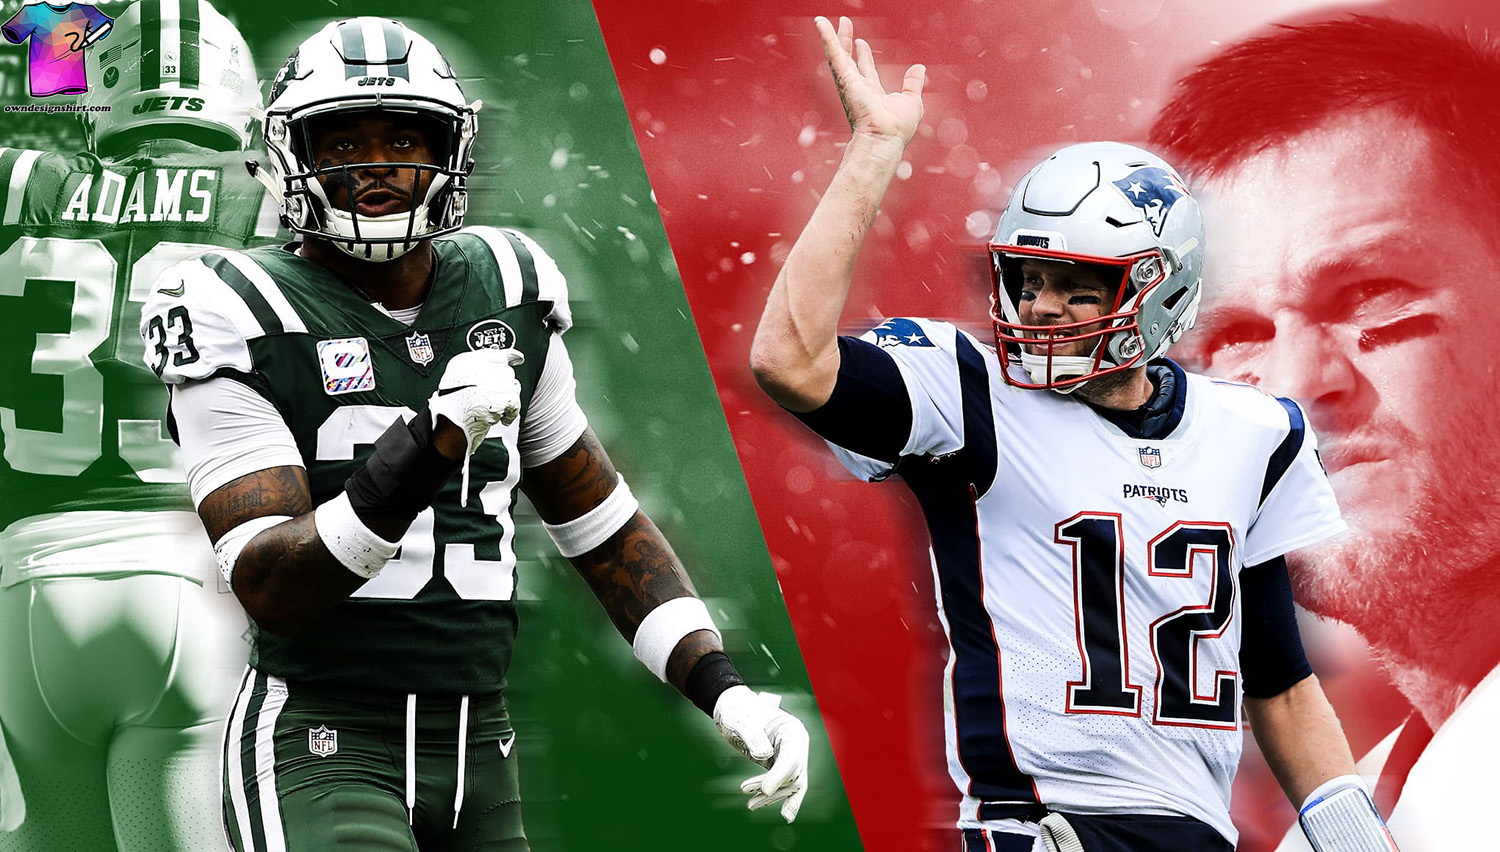 New England Patriots vs. New York Jets in NFL Week 18 at Gillette Stadium - Predictions and Playoff Implications